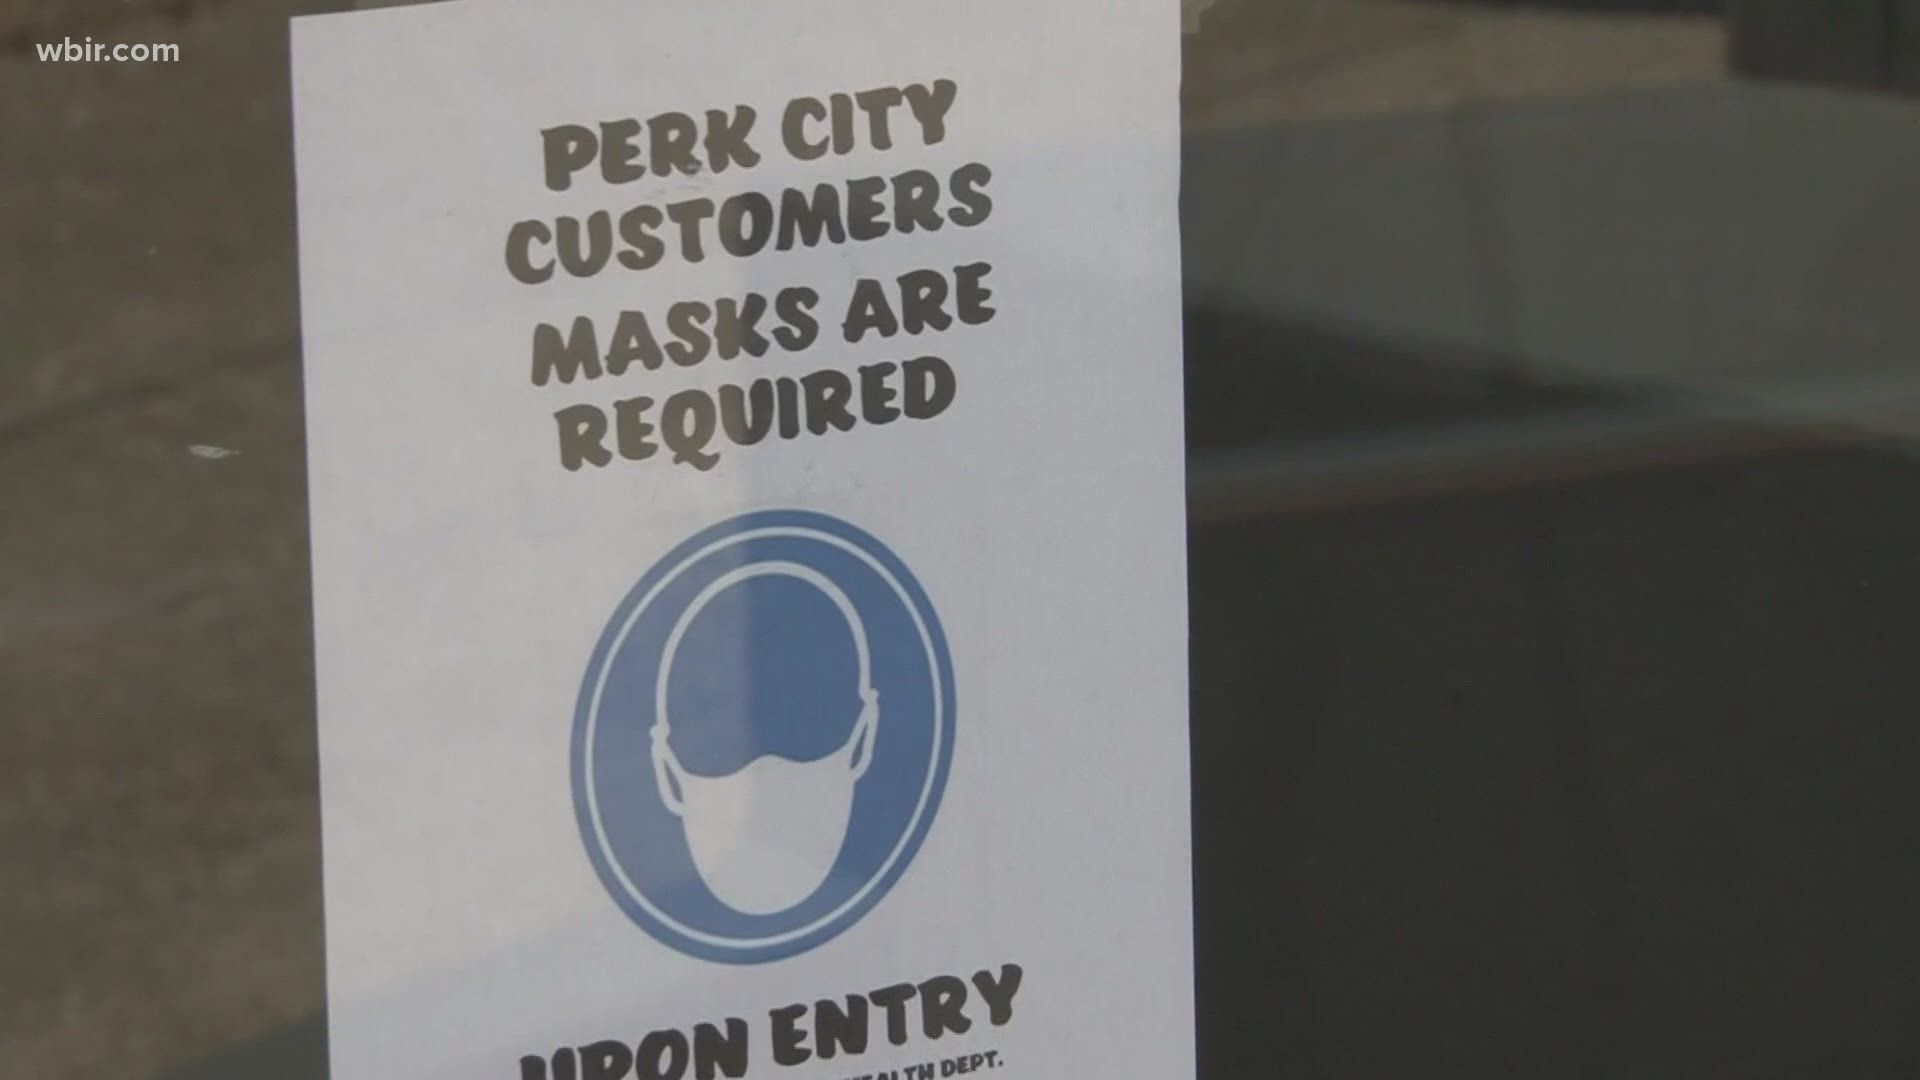 It's been one week since Knox County's mask mandate went into effect for indoor public spaces. Yvonne Thomas shares how people, businesses and police are adjusting.